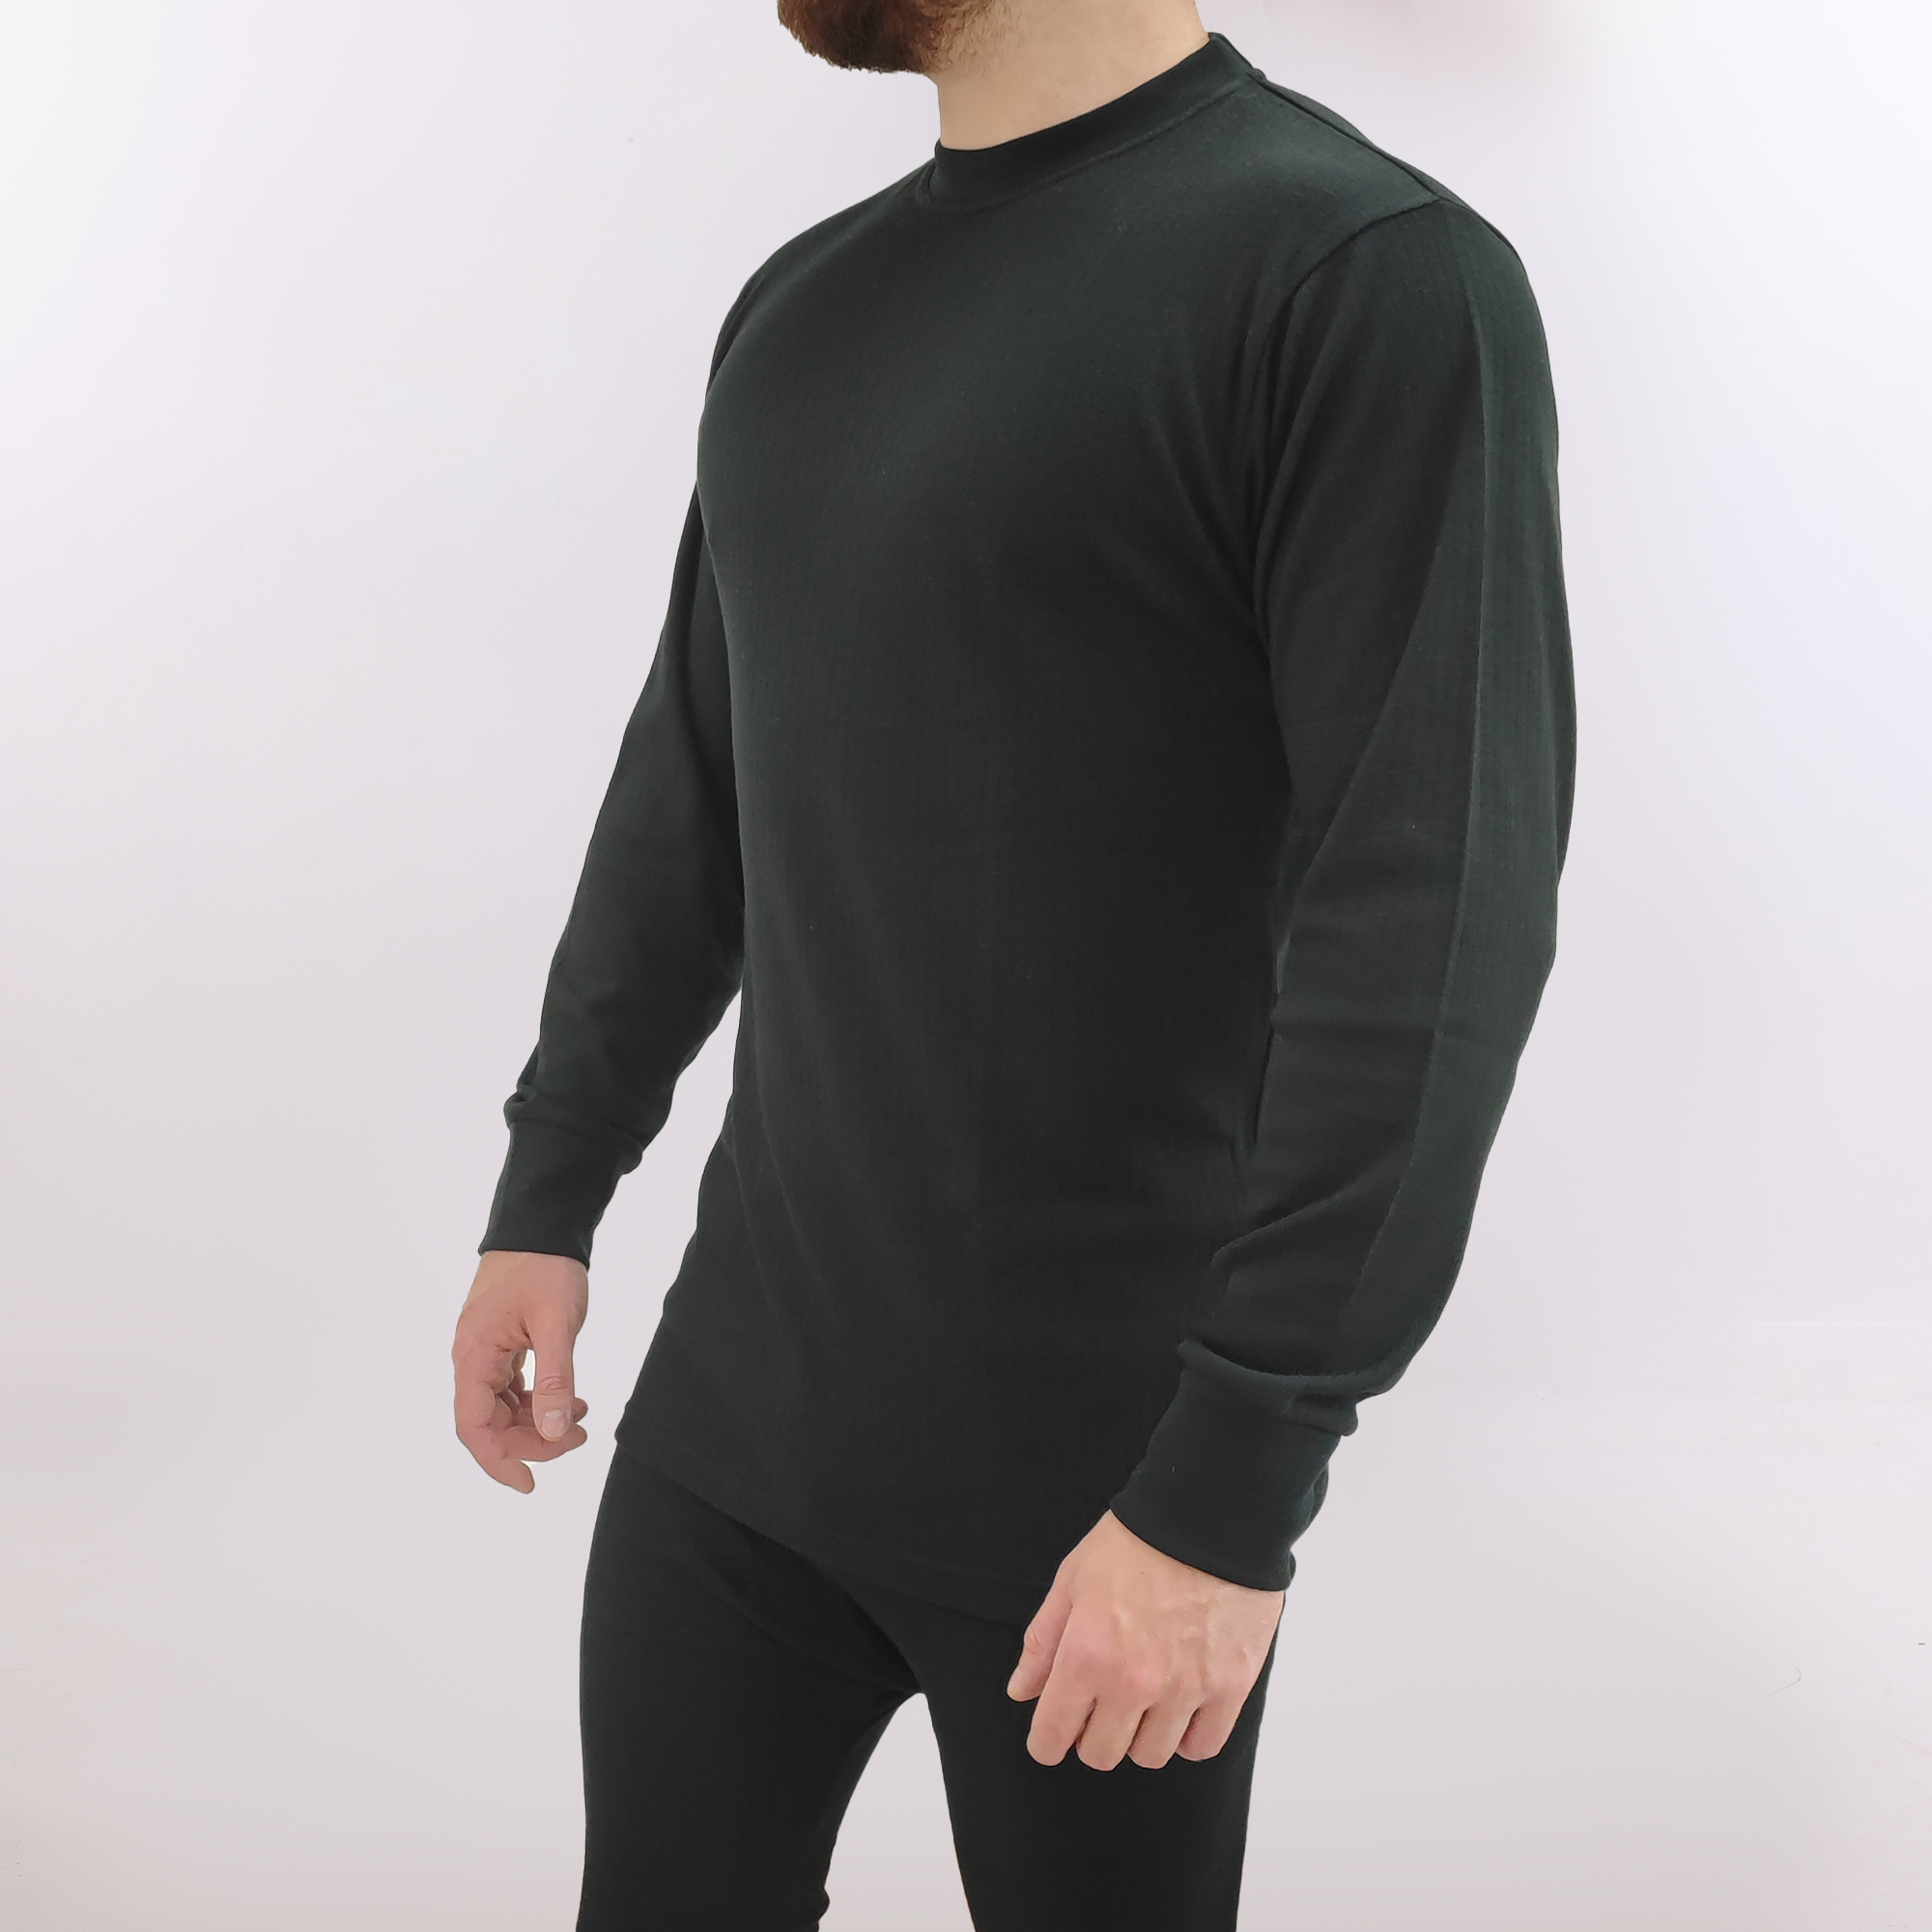 Thermal Base Layer Trousers by Site King - Site King